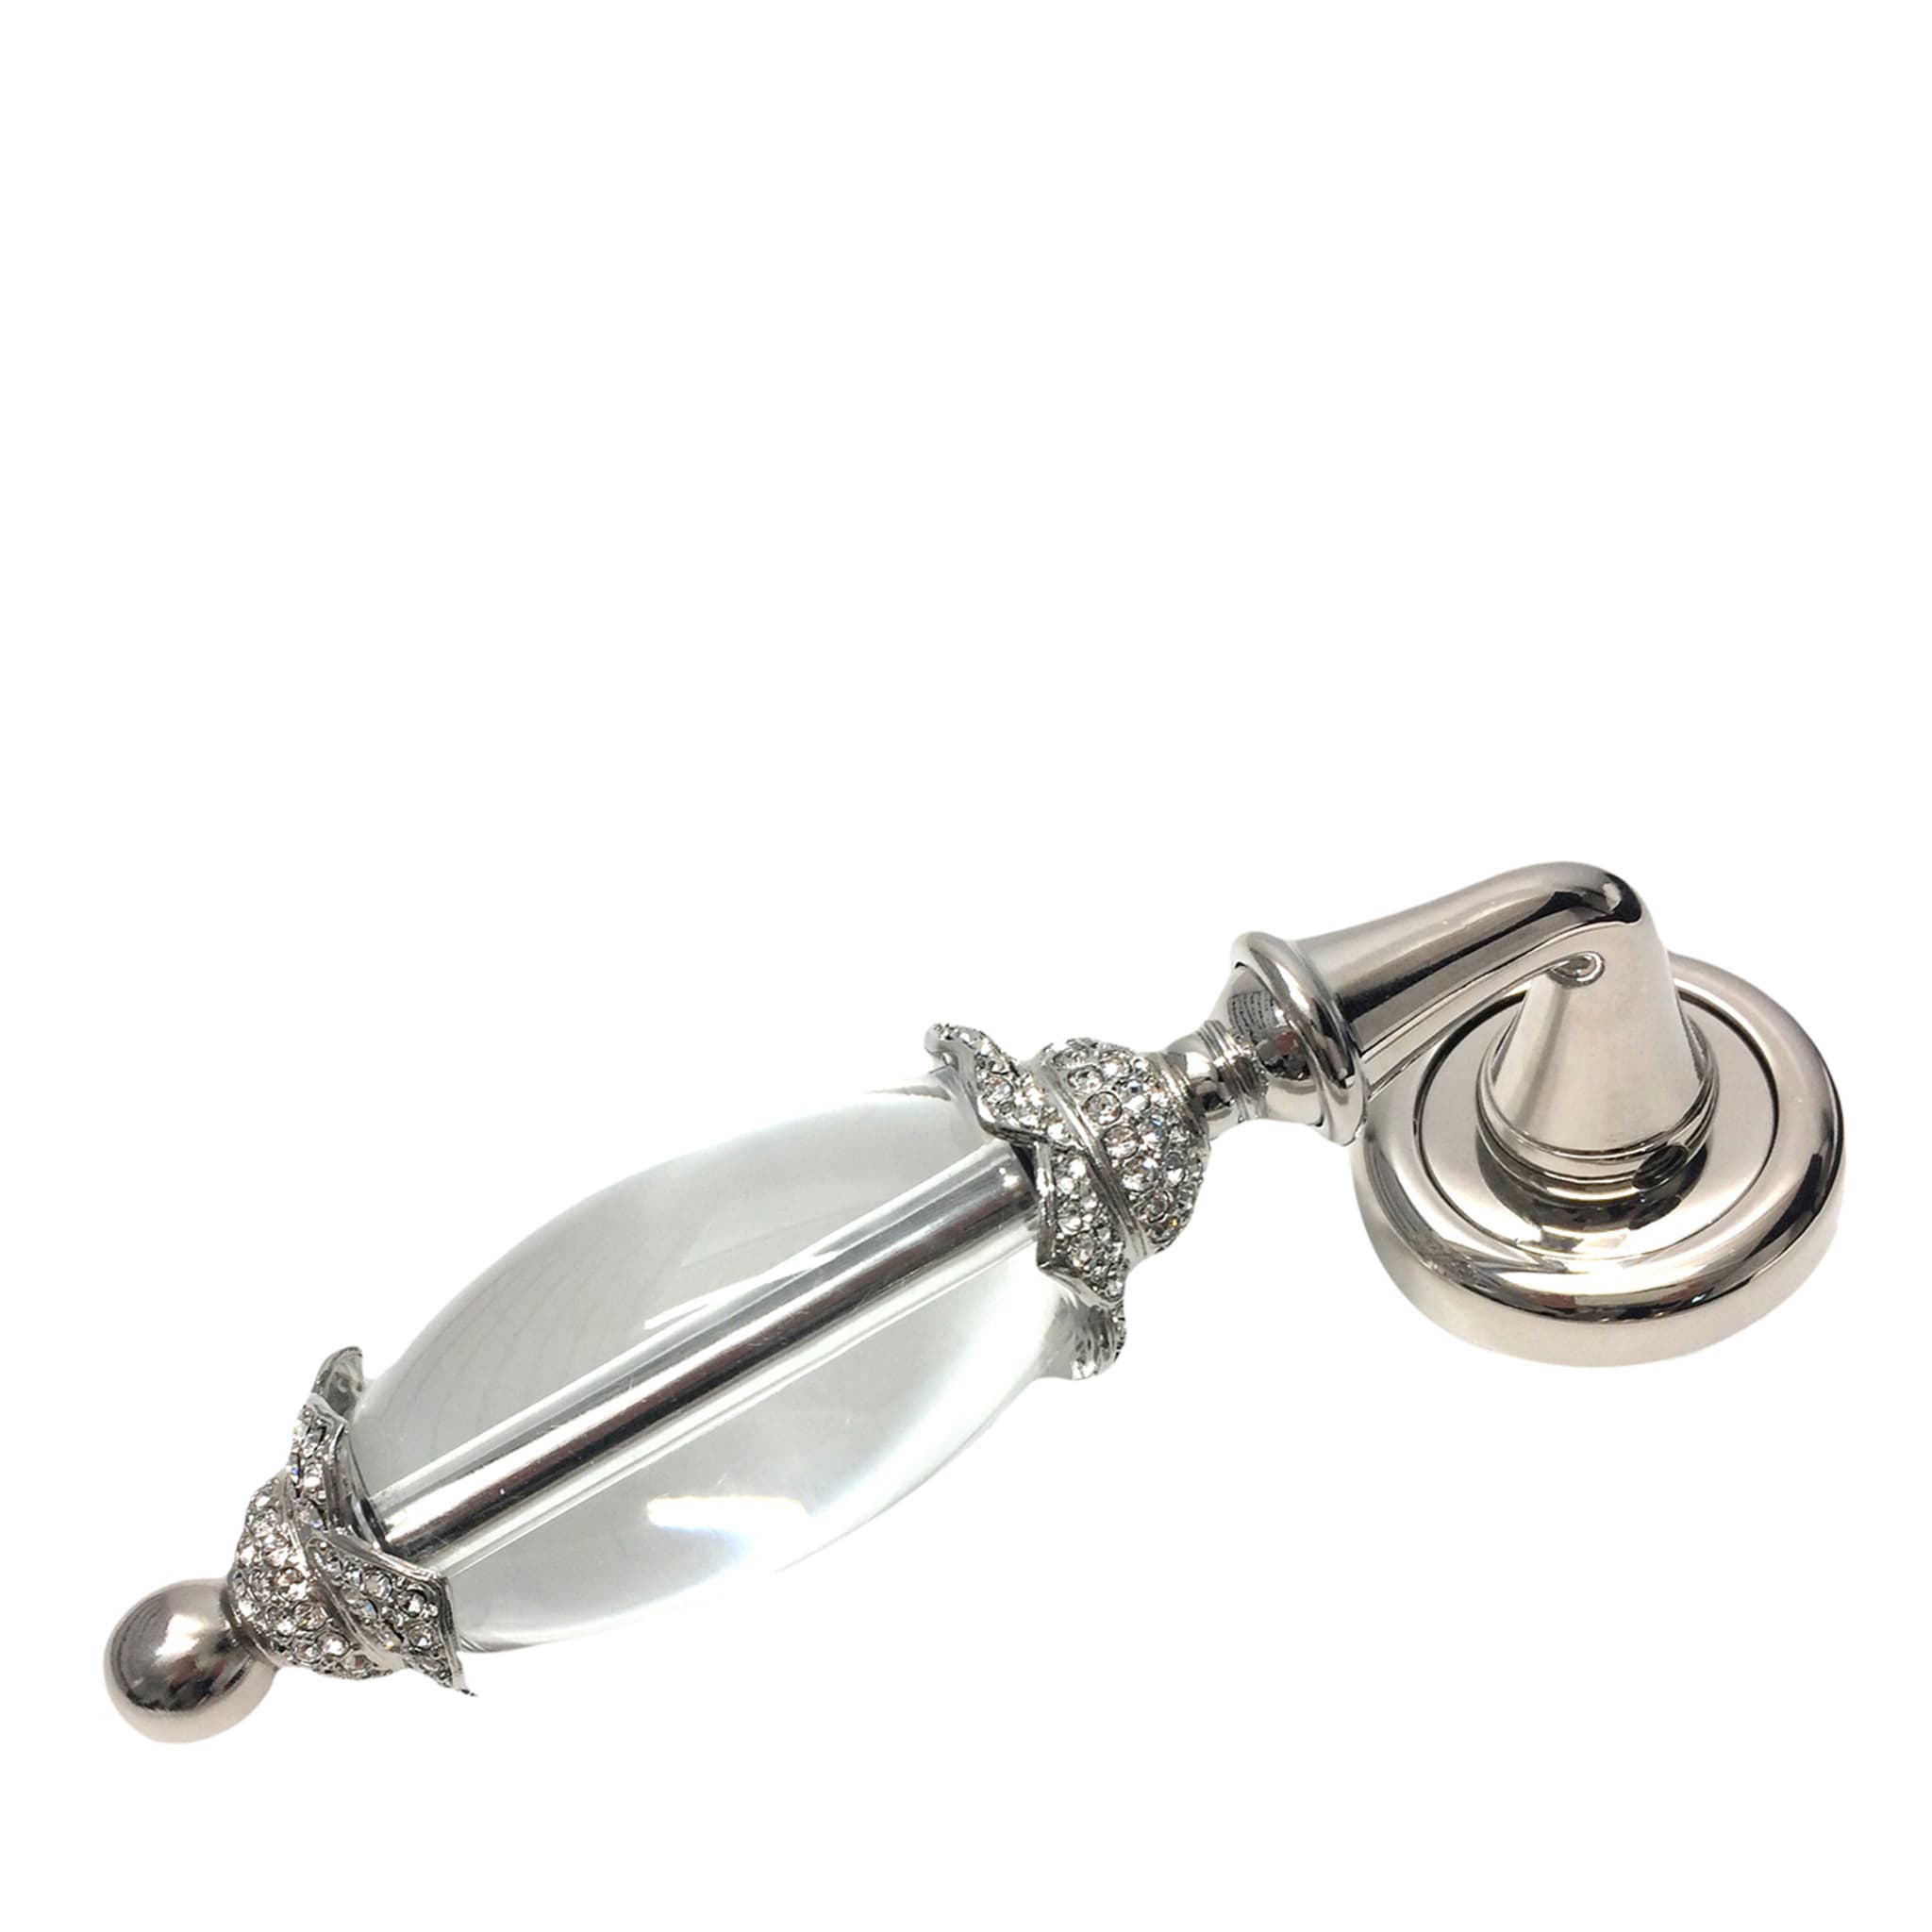 Drop-Shaped Silvery Lever On Rose Handle with Rhinestones - Main view